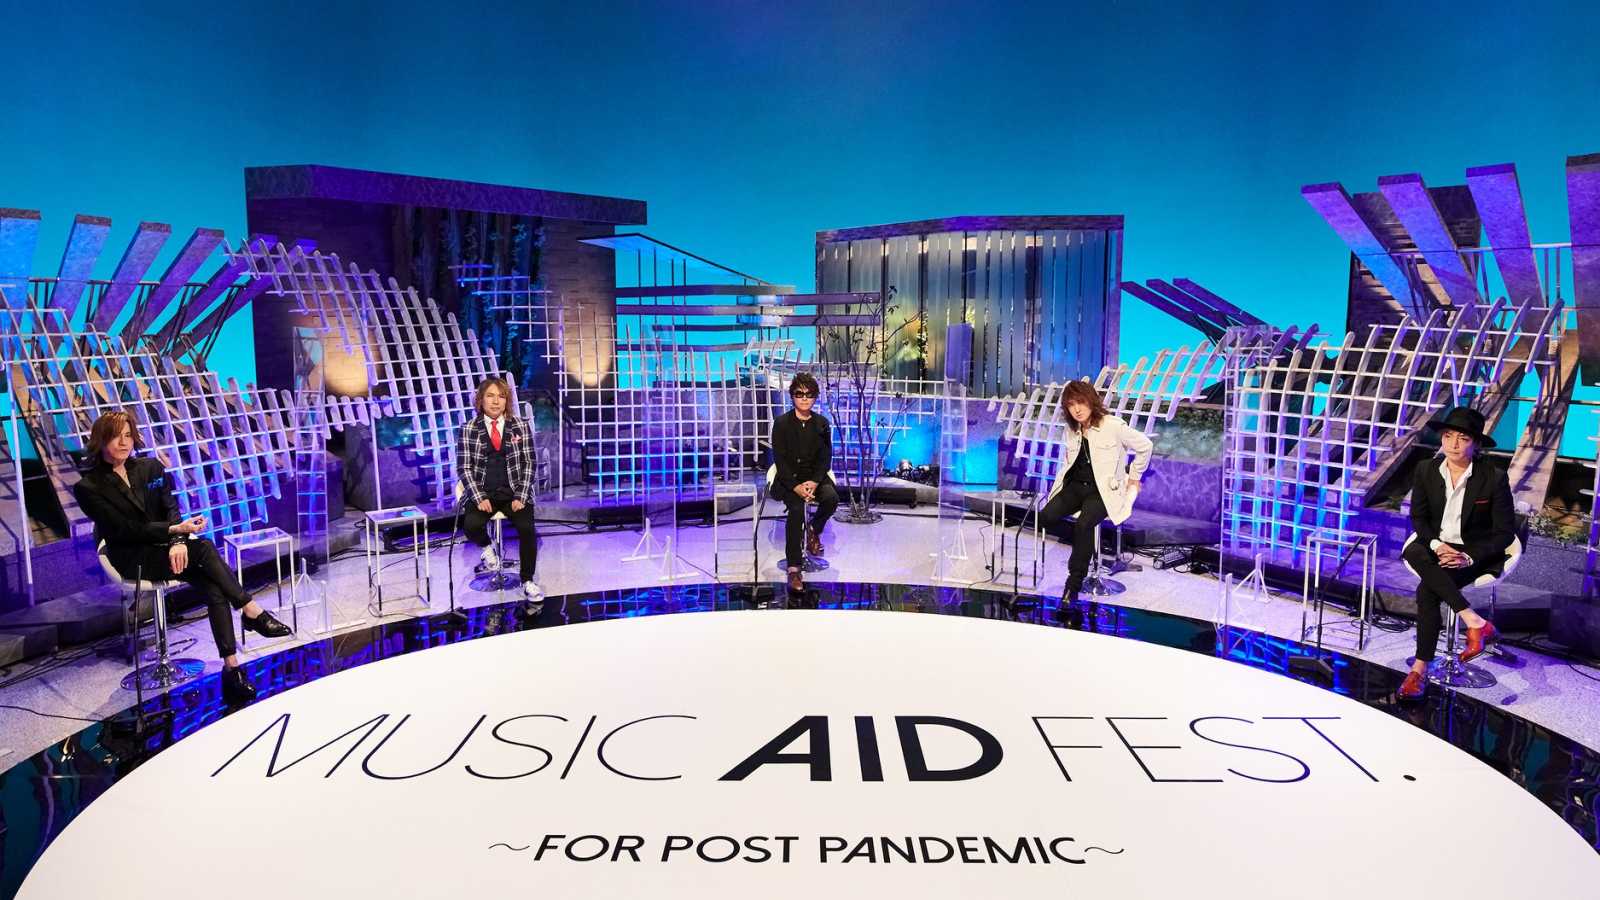 LUNA SEA to Stream "MUSIC AID FEST. ~FOR POST PANDEMIC~" Aftertalk Program and Upload 30 Full Music Videos to YouTube © LUNA SEA. All rights reserved.